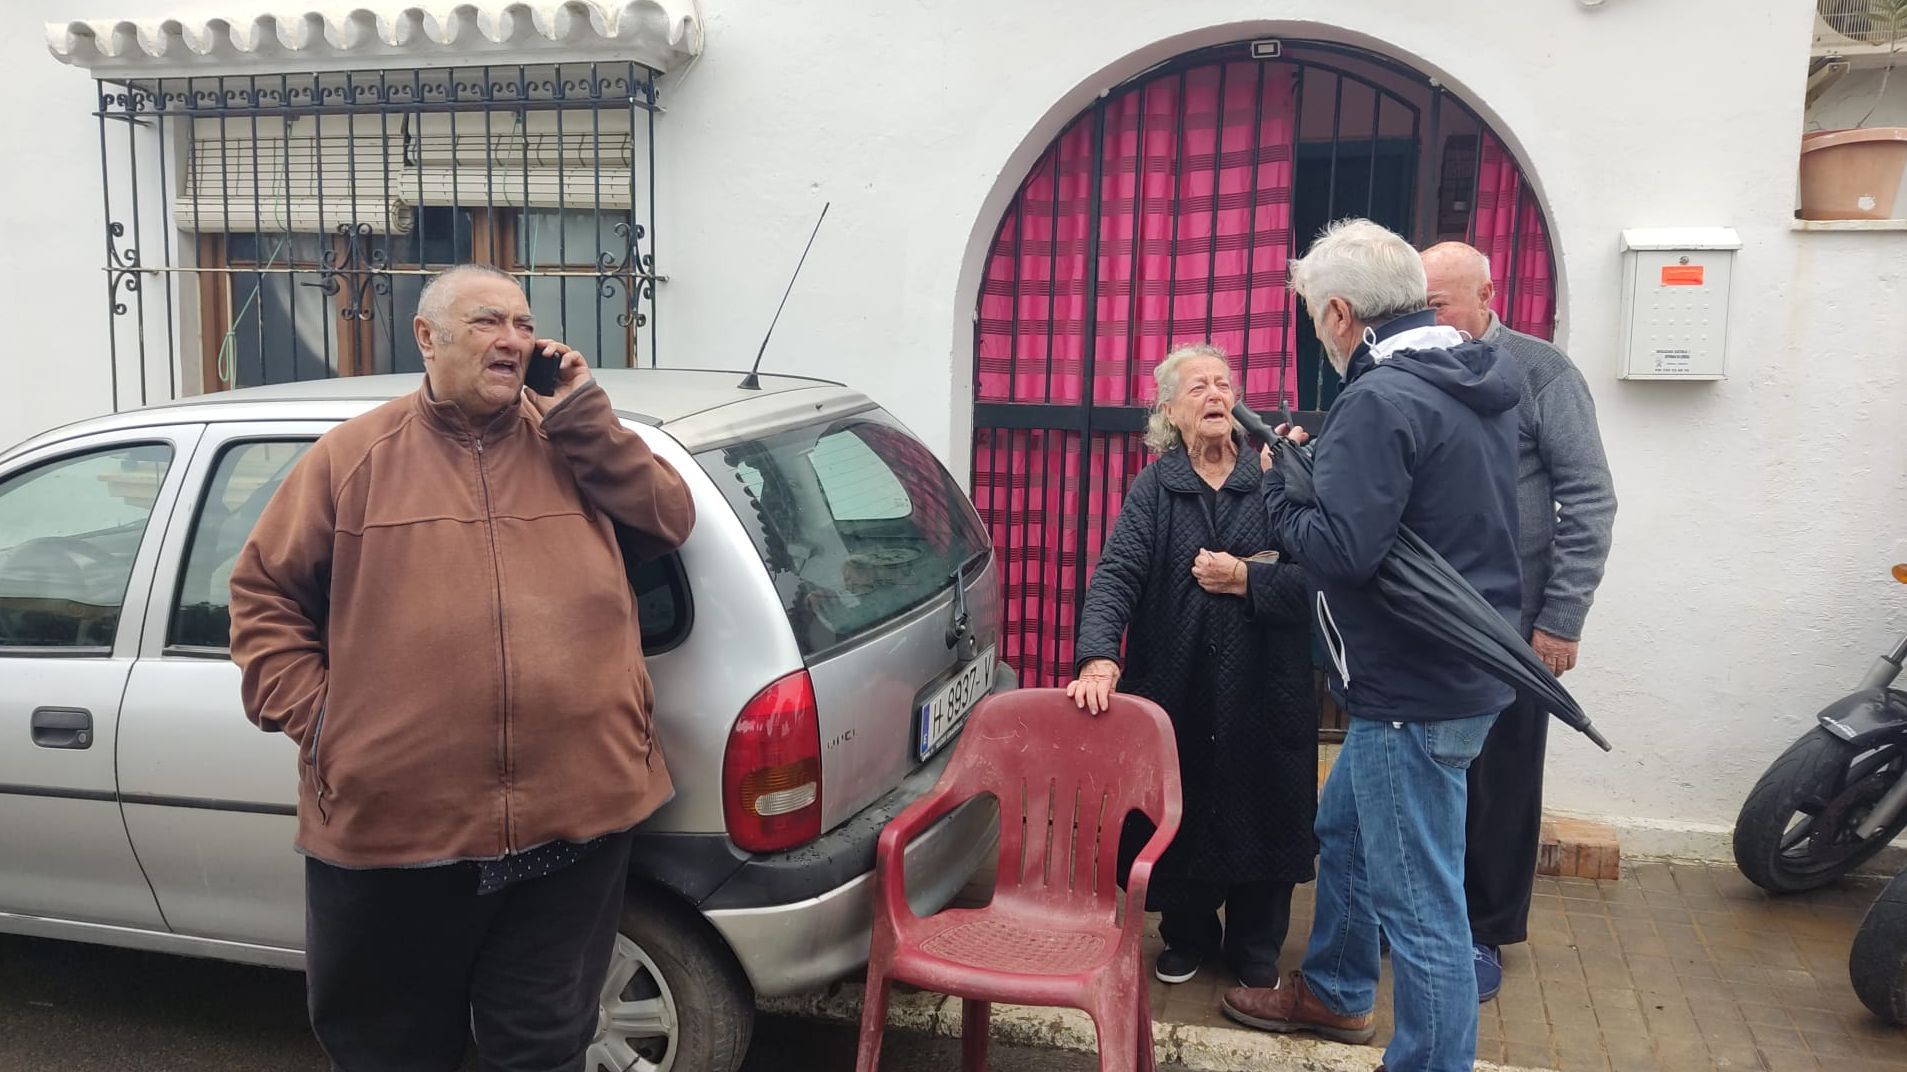 They discover the grandfather and his grandson who had disappeared within the province of Huelva